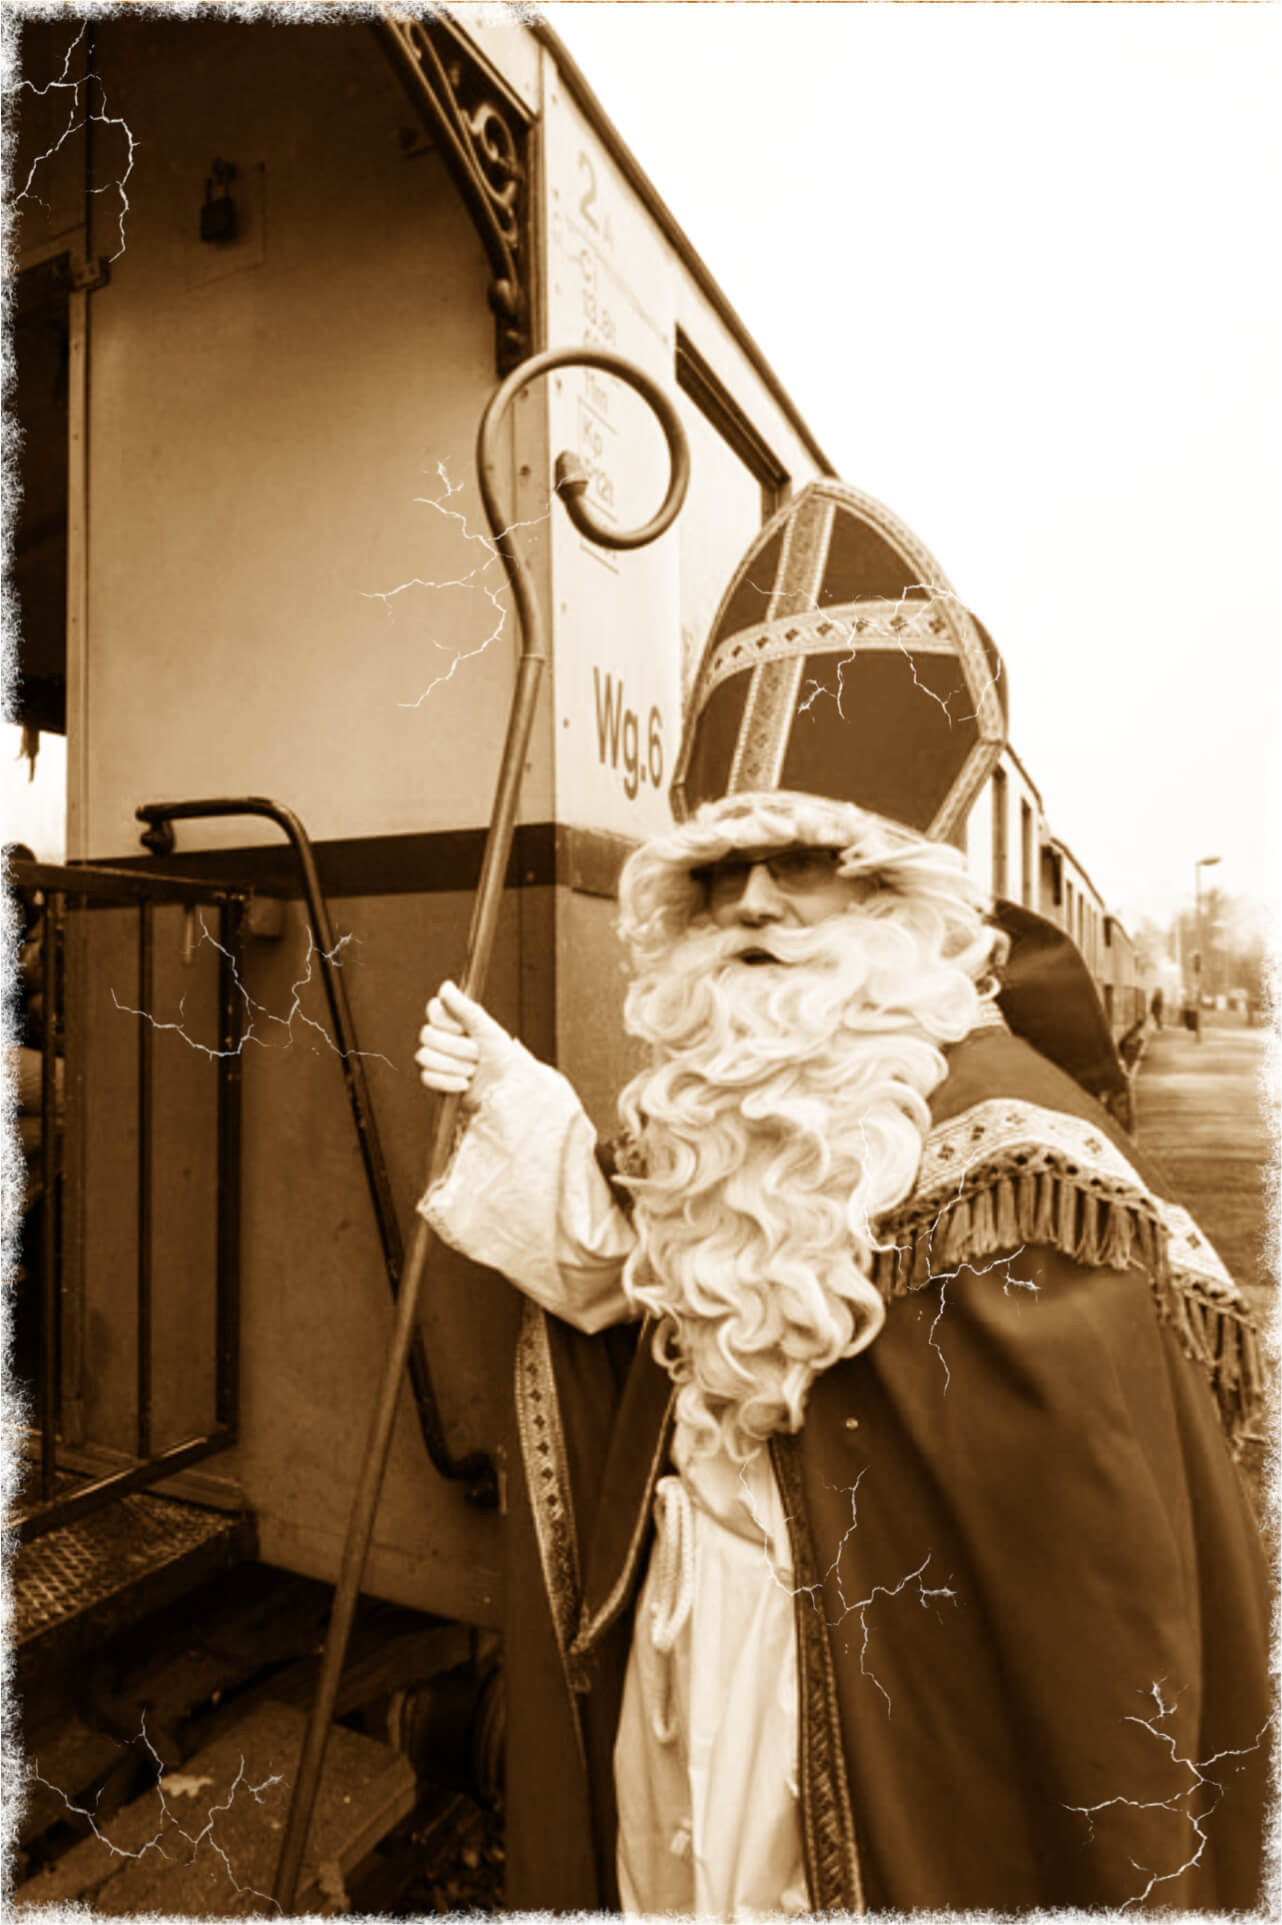 Father Christmas in front of a train carriage